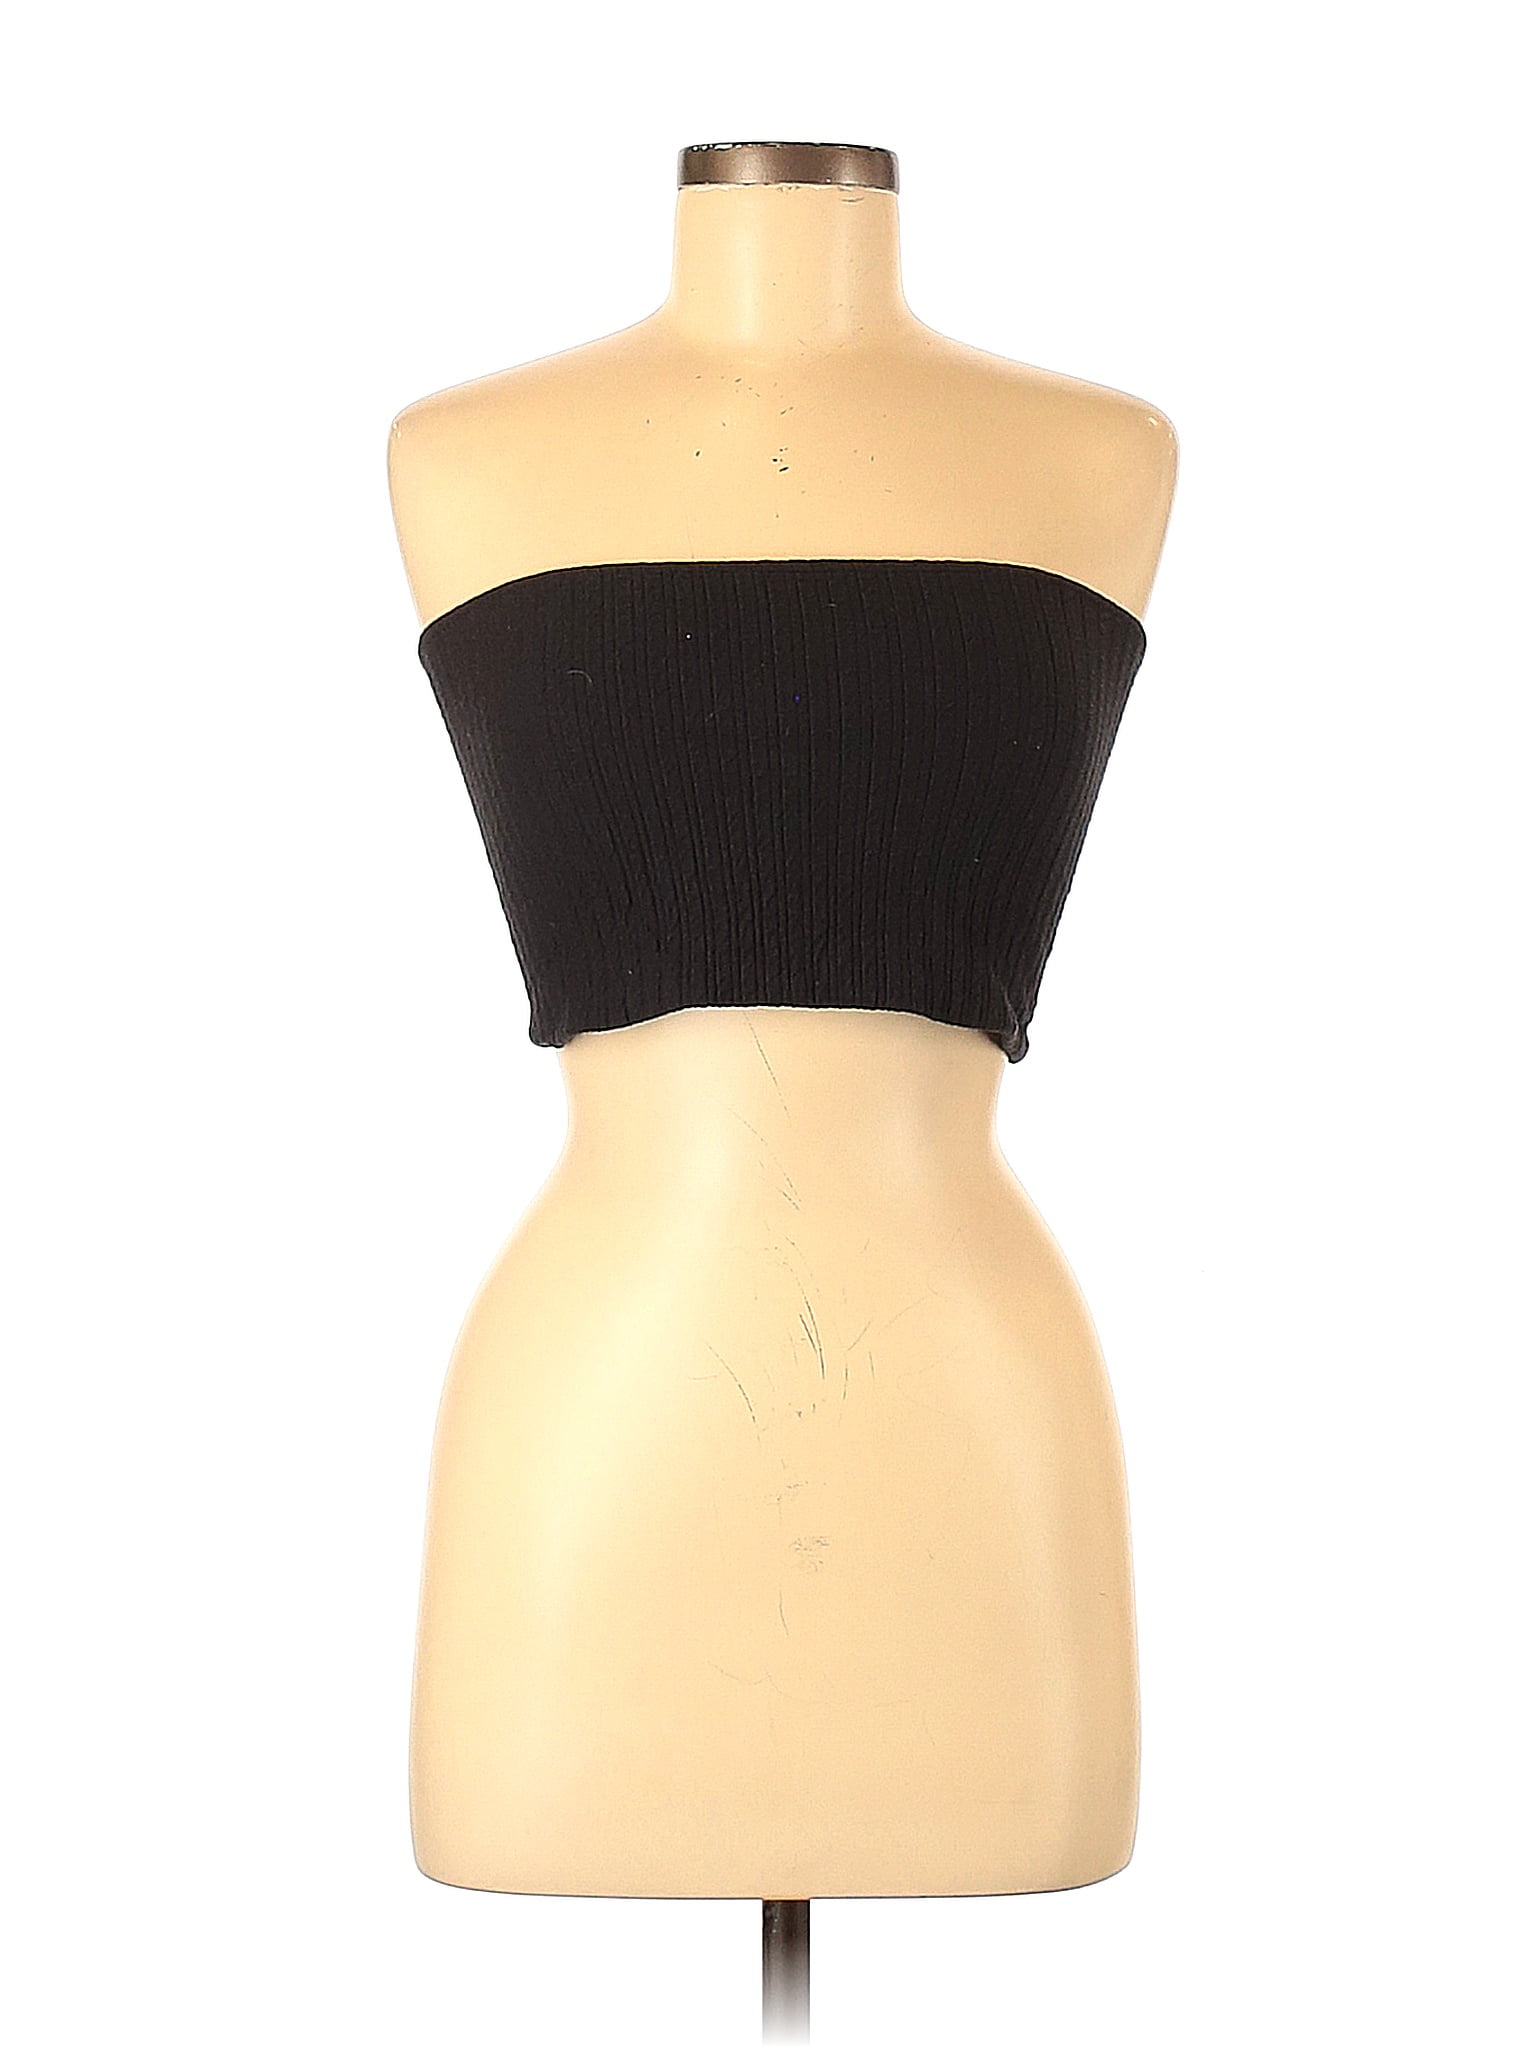 Pre-Owned Lululemon Athletica Womens Size 8 Tube Top Palestine